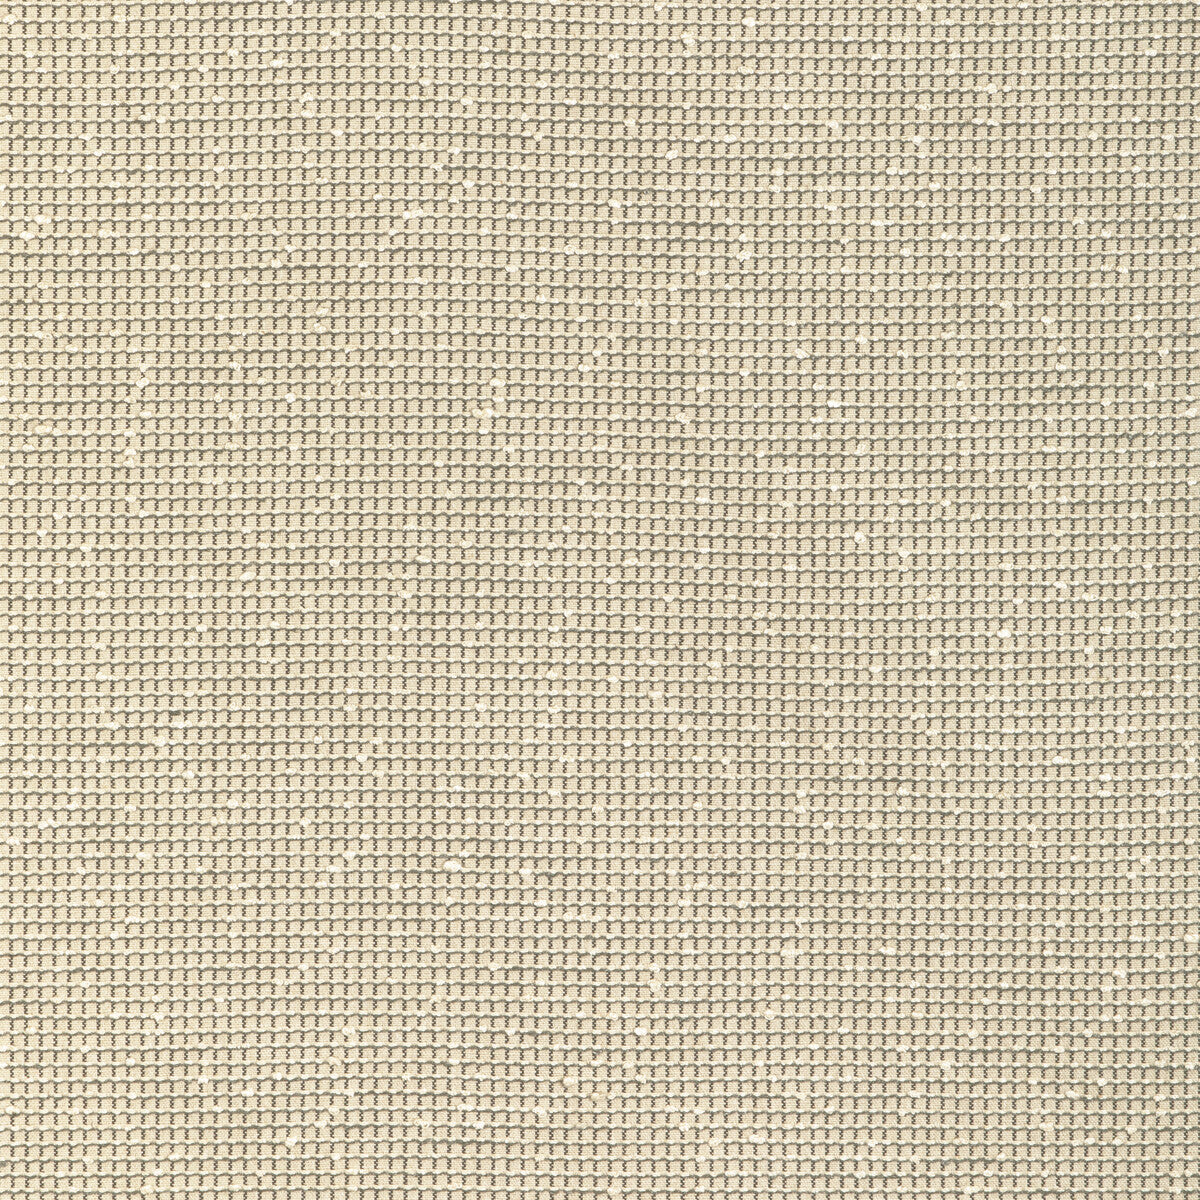 Mado fabric in ash color - pattern GWF-3798.1101.0 - by Lee Jofa Modern in the Kelly Wearstler VIII collection